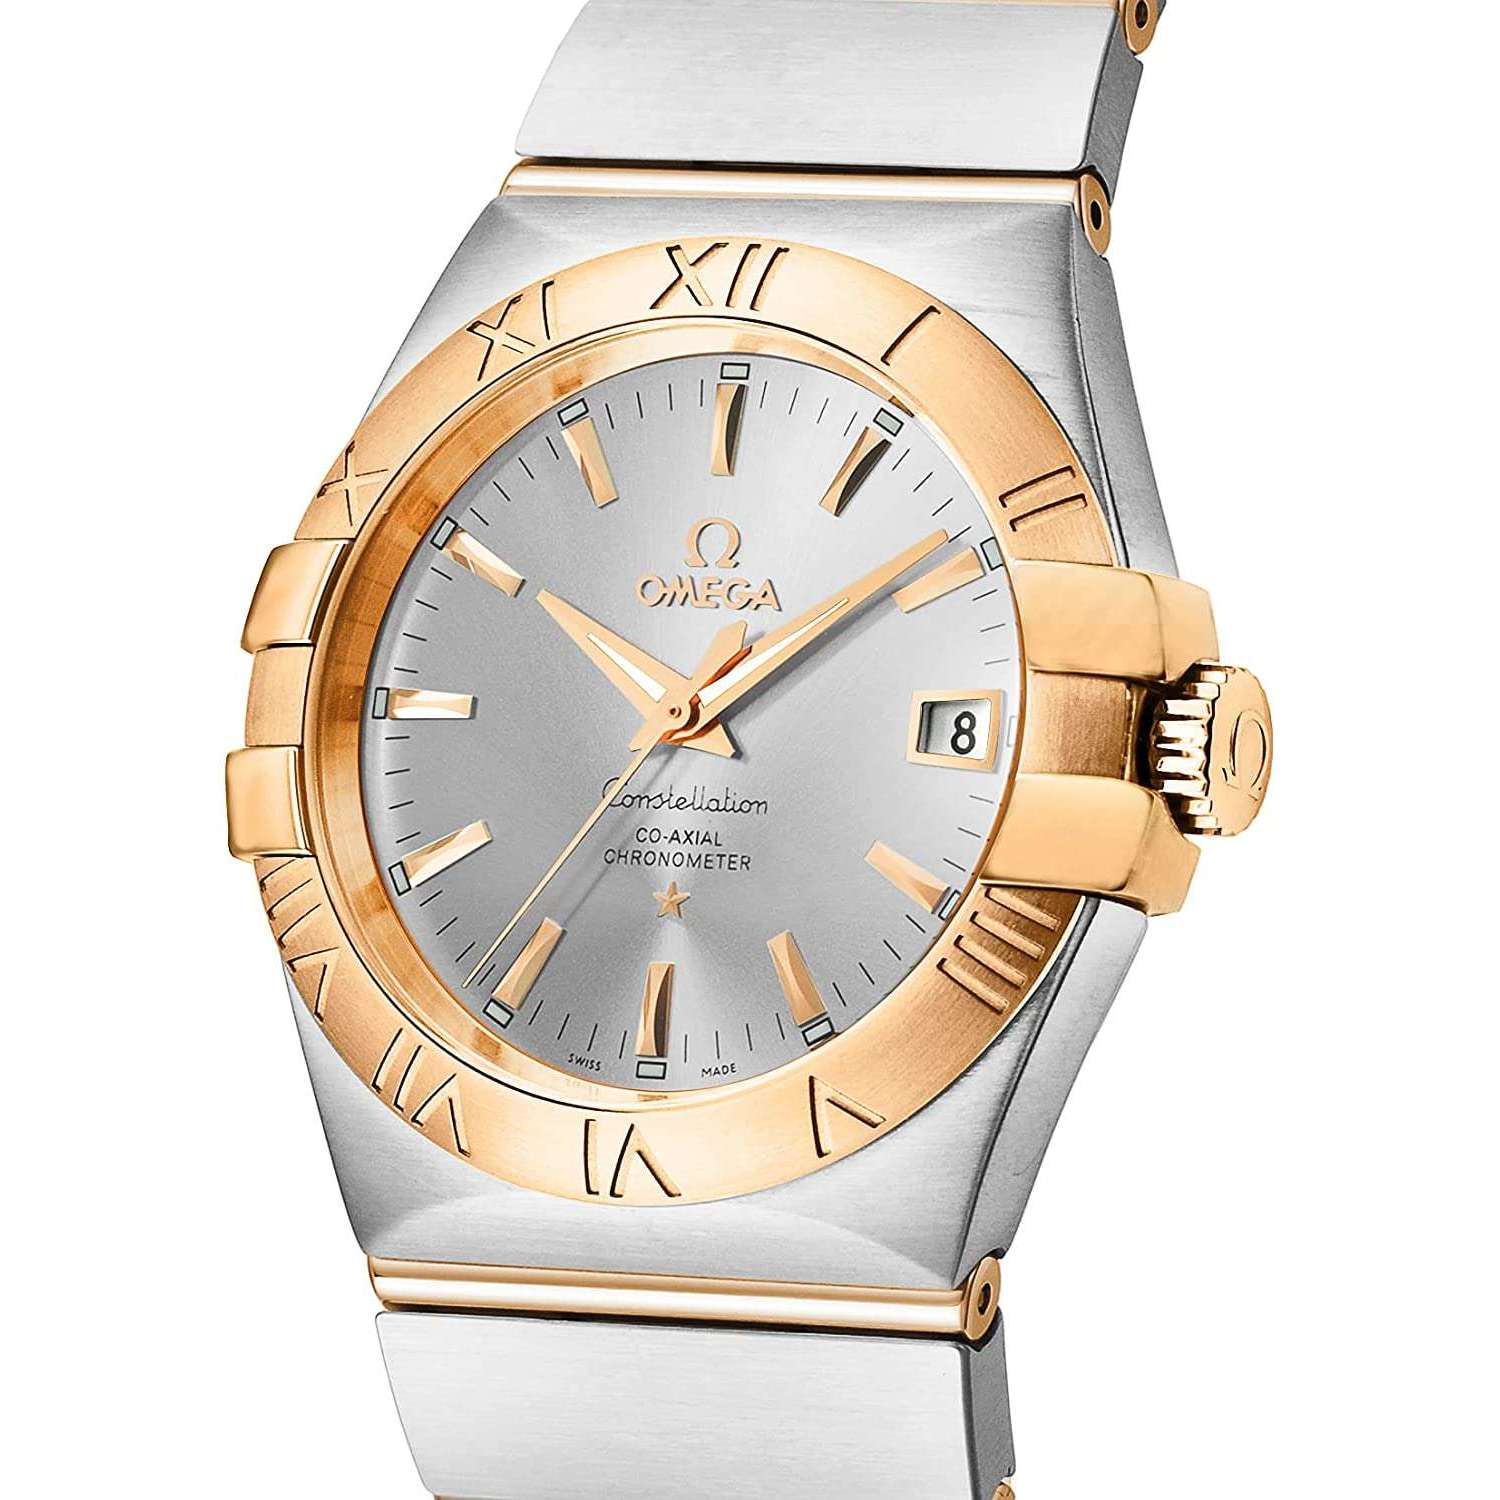 ROOK JAPAN:OMEGA CONSTELLATION CO-AXIAL CHRONOMETER 35 MM MEN WATCH 123.20.35.20.02.001,Luxury Watch,Omega